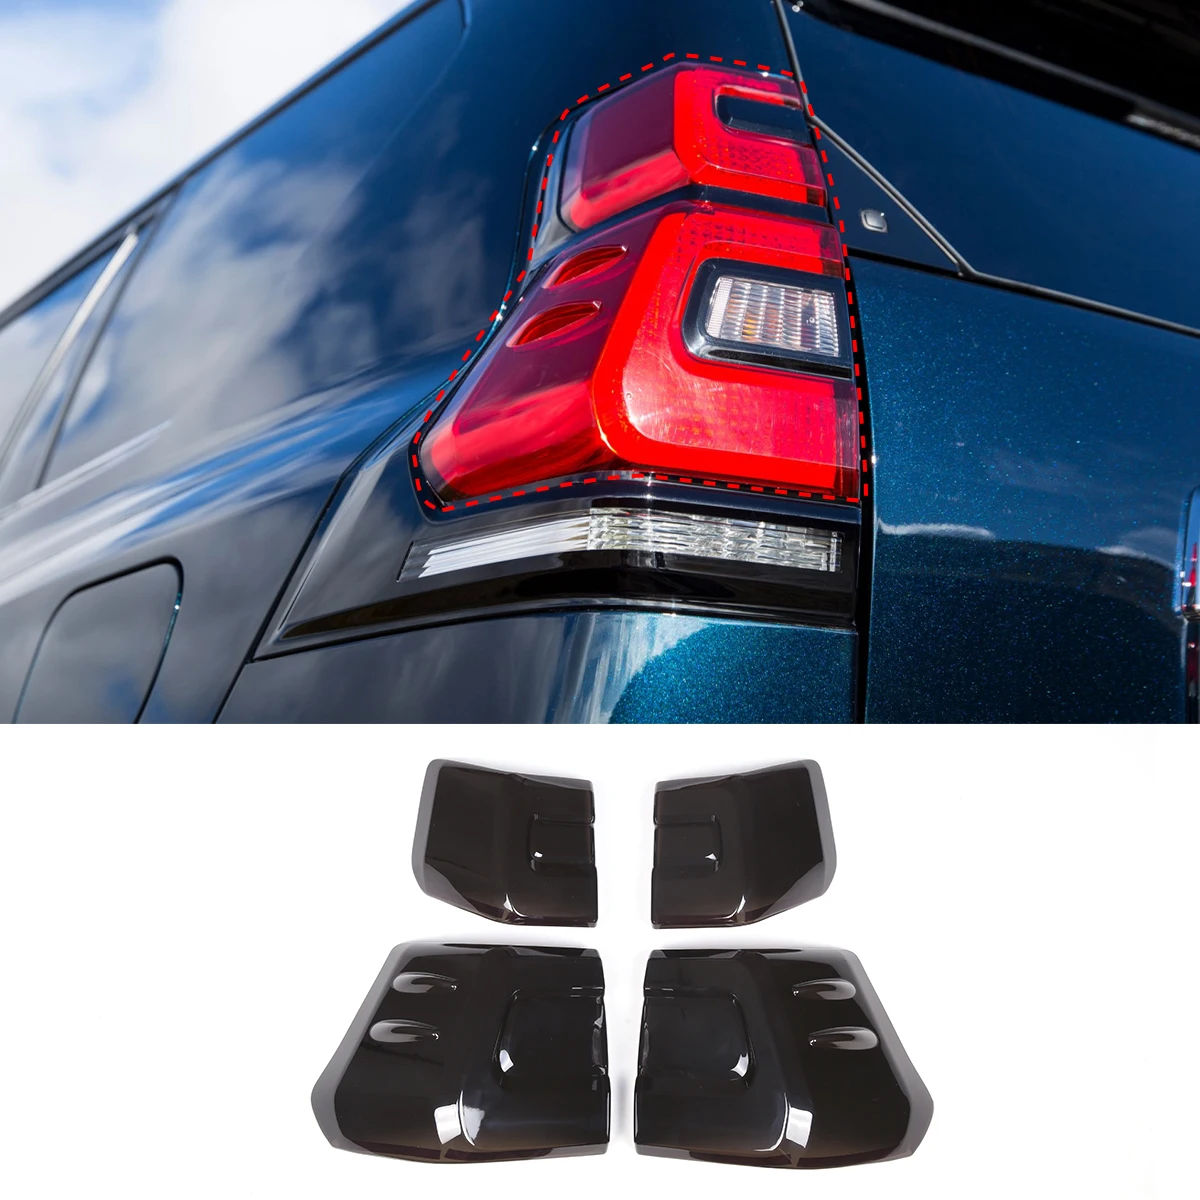 

For Toyota Land Cruiser Prado FJ150 18-22 ABS blackened Car Rear Taillight Light Cover Protect Lampshade sticker car Accessories